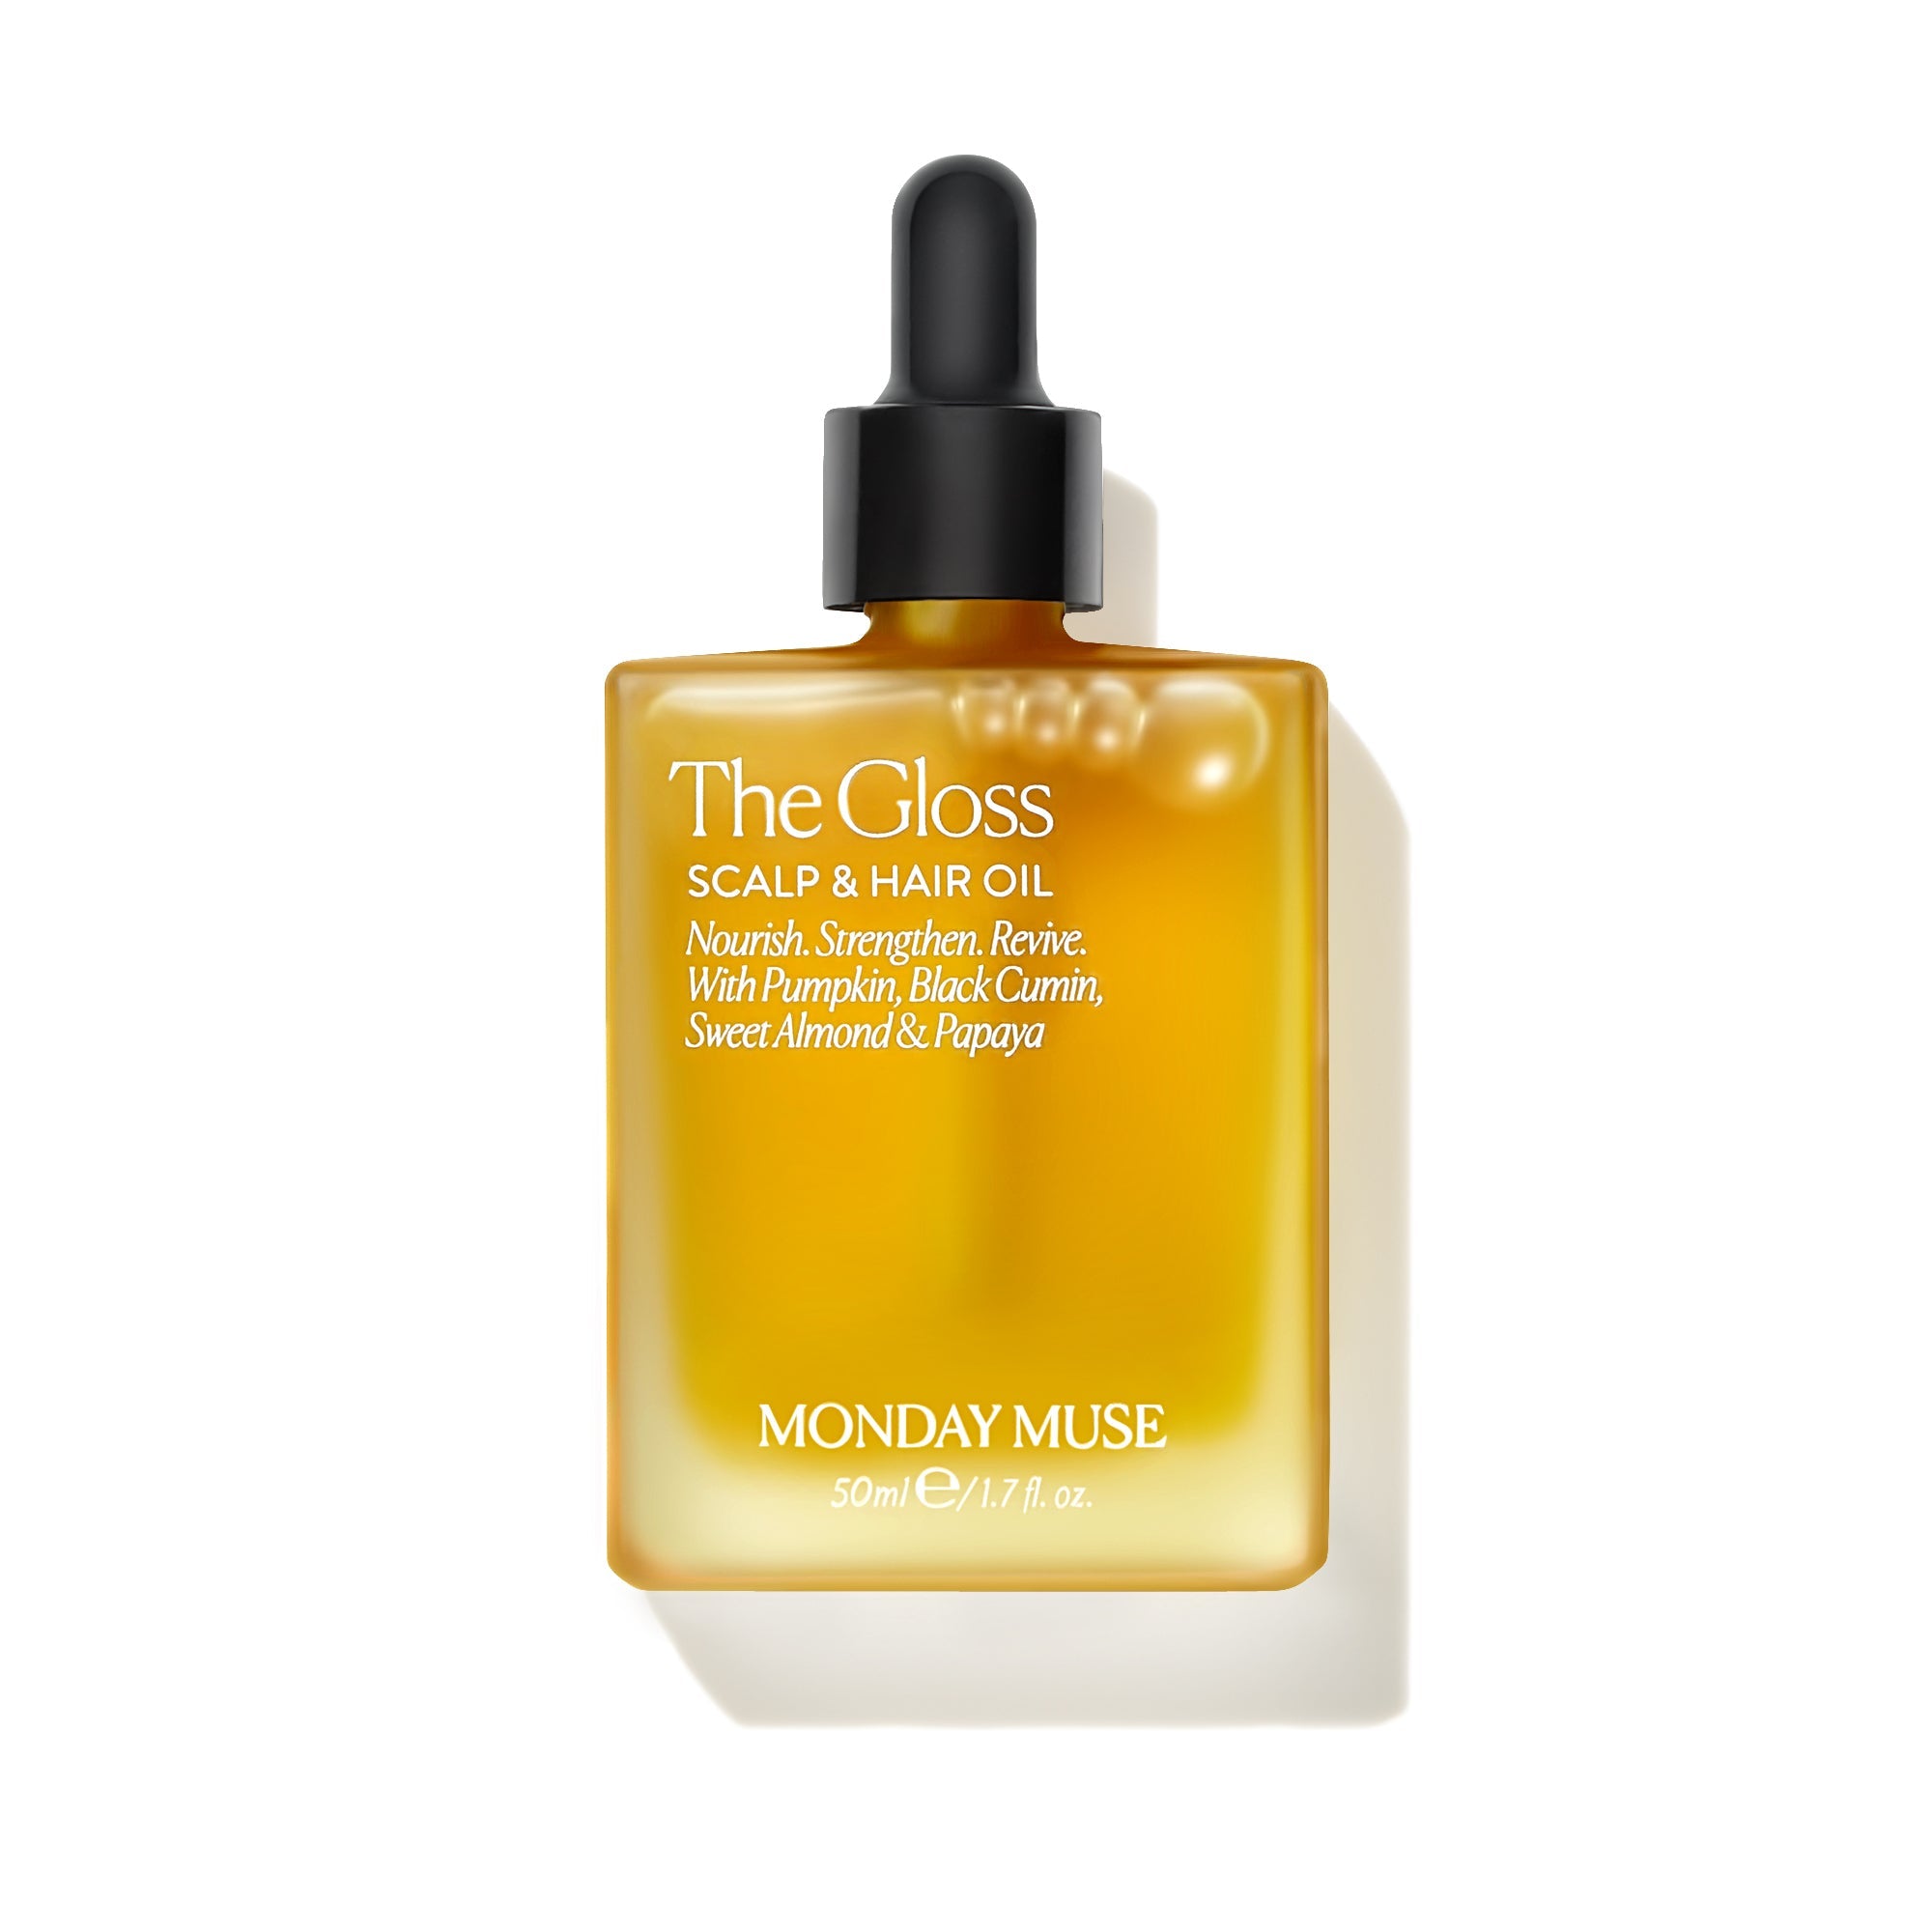 THE GLOSS - Scalp & Hair Oil | Monday Muse